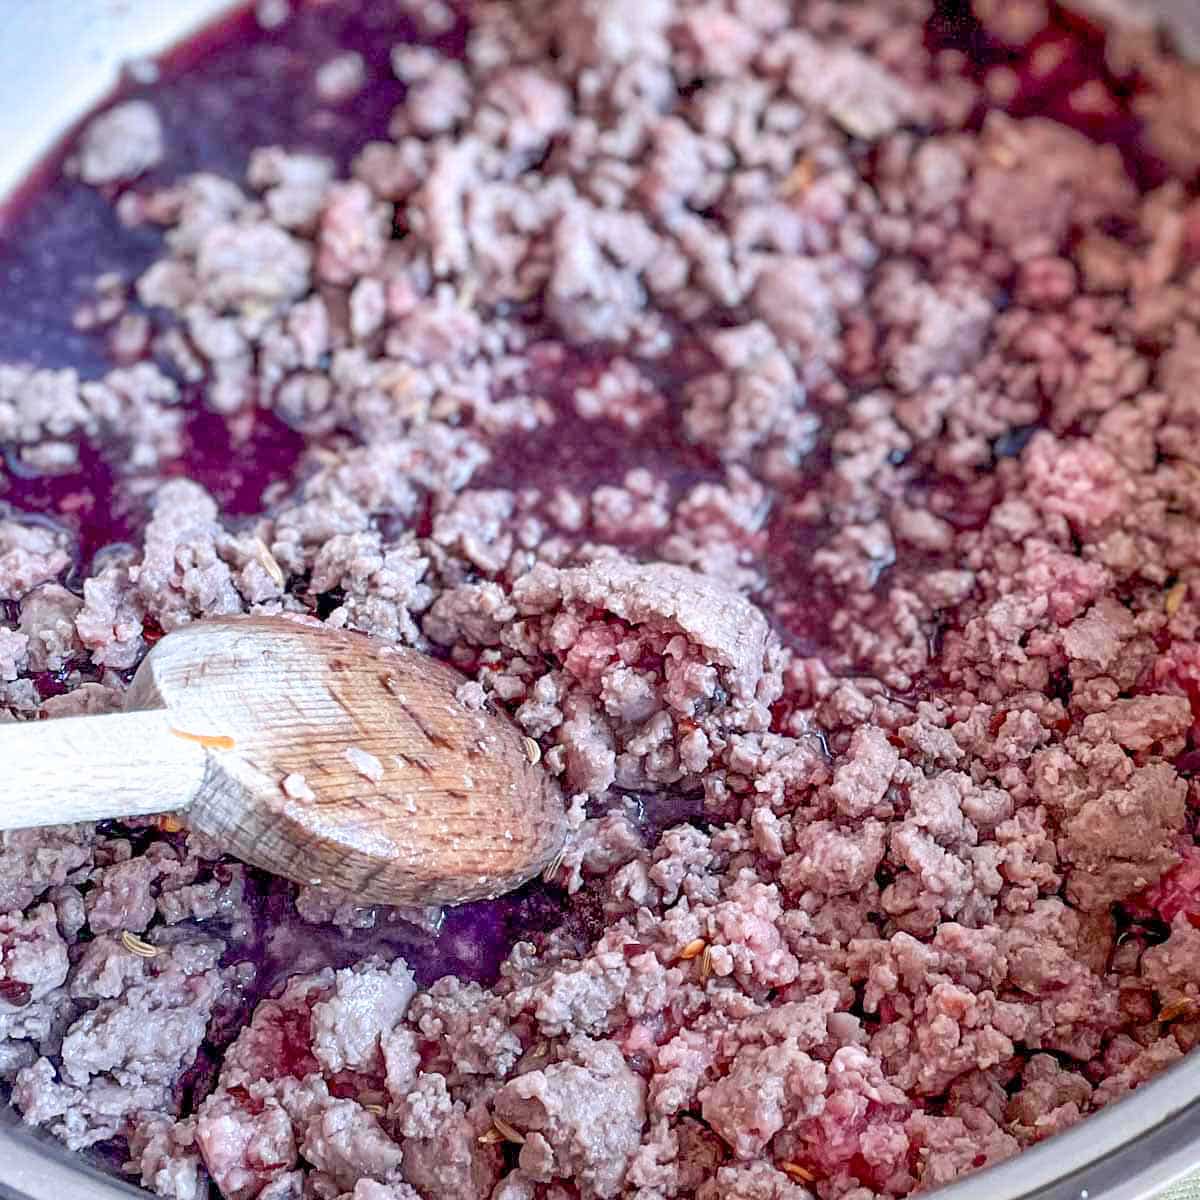 Red wine is added to the ground beef in the pan.